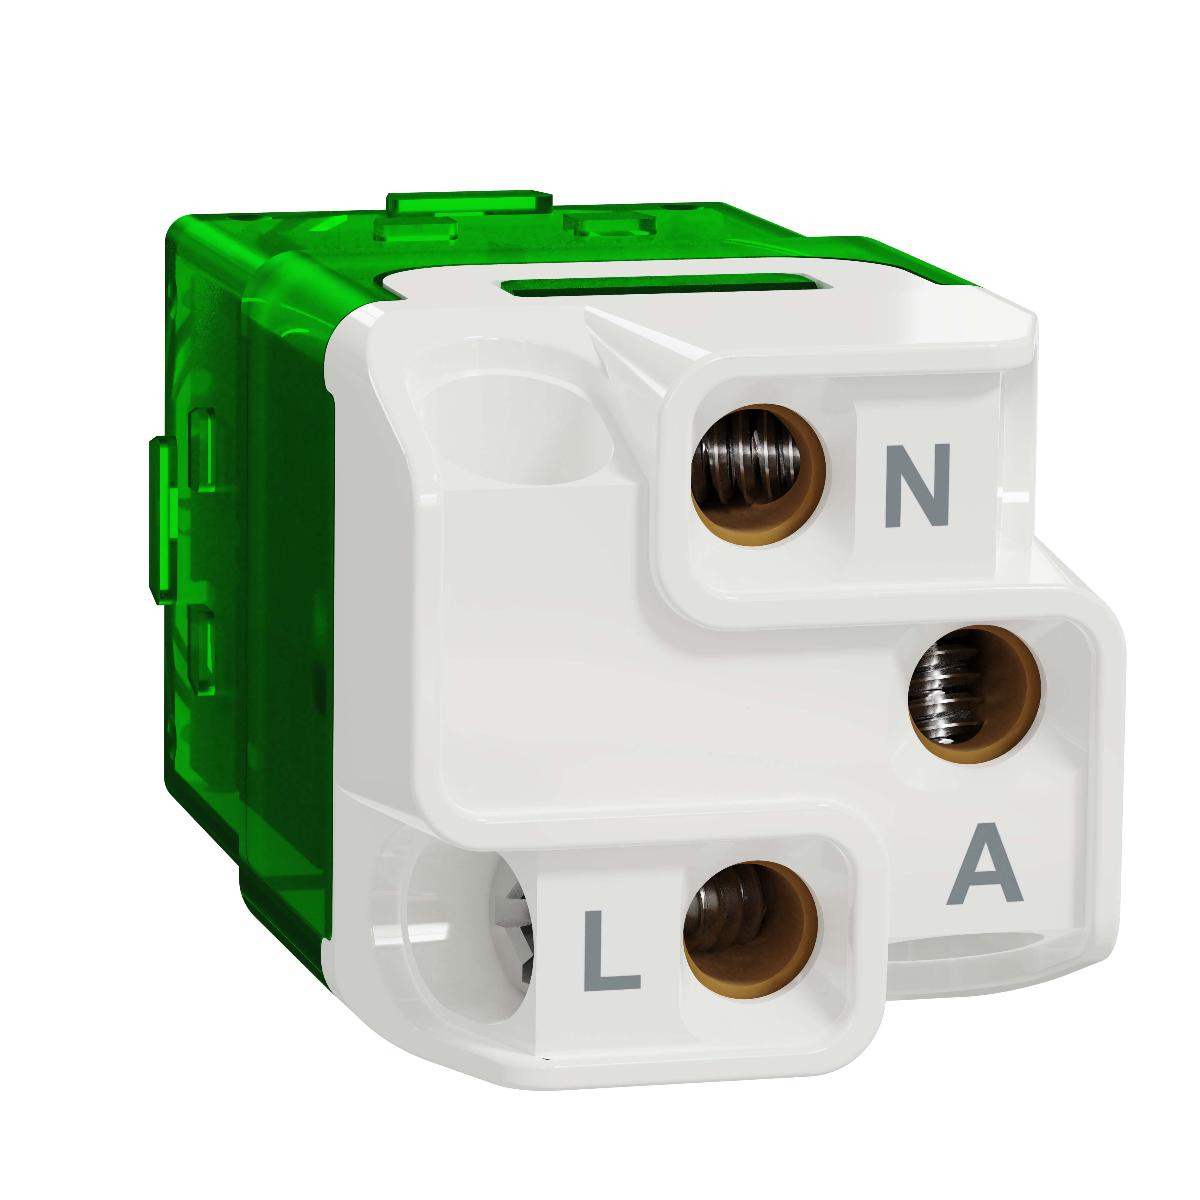 CONNECTED SWITCH 2AX 240V ZIGBEE VW